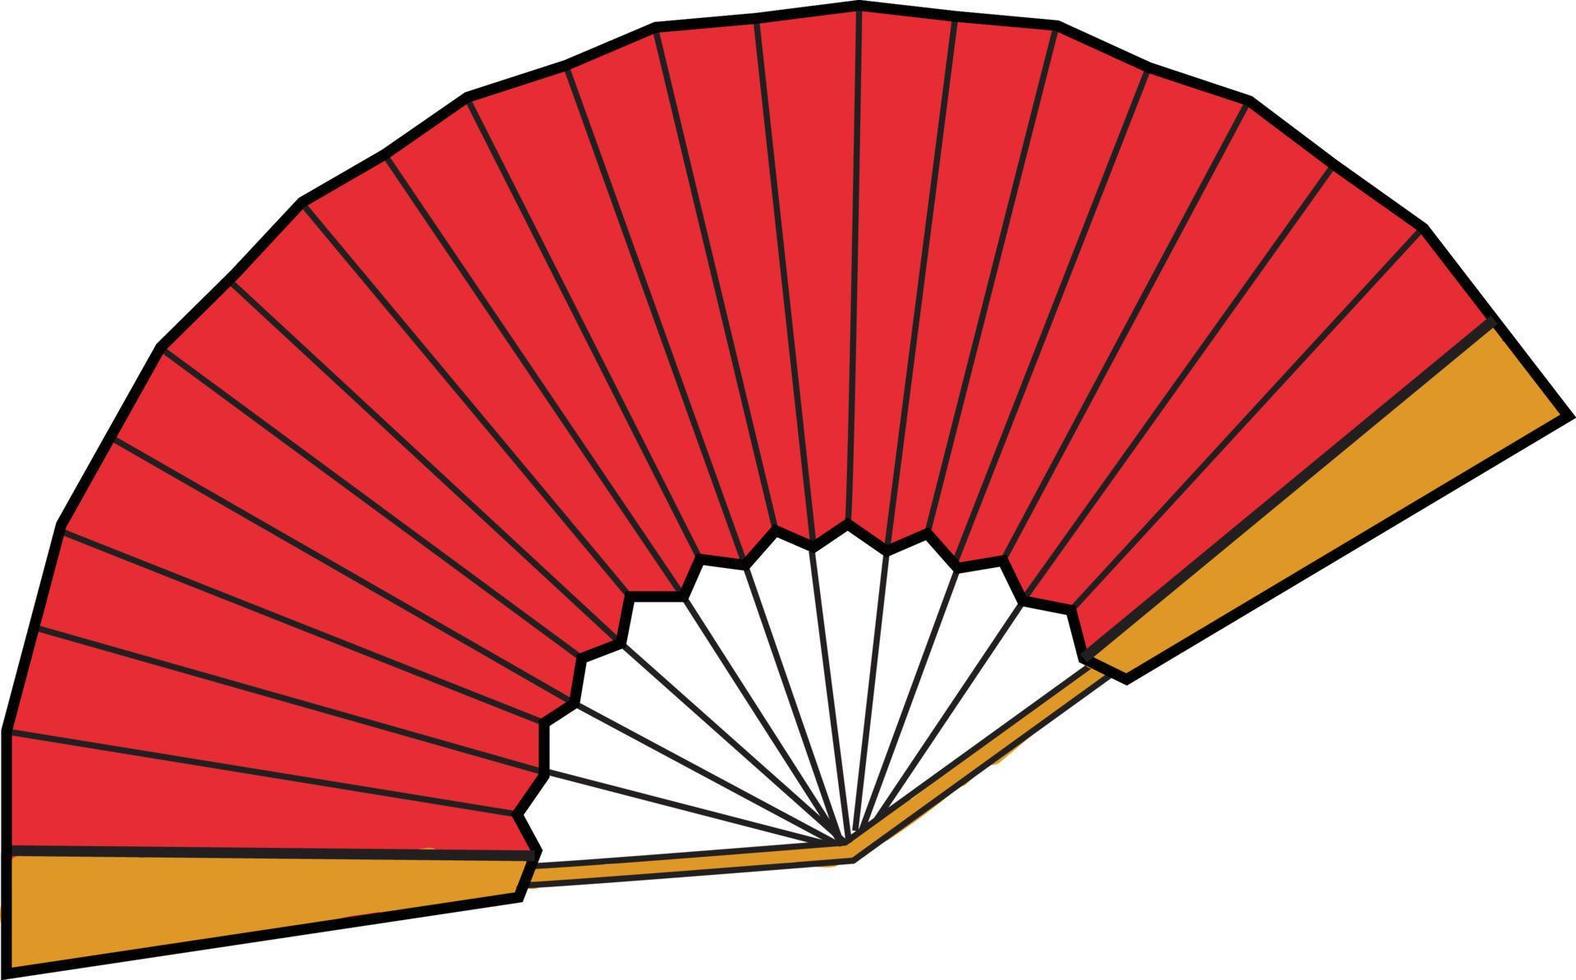 Red fan, illustration, vector on white background.